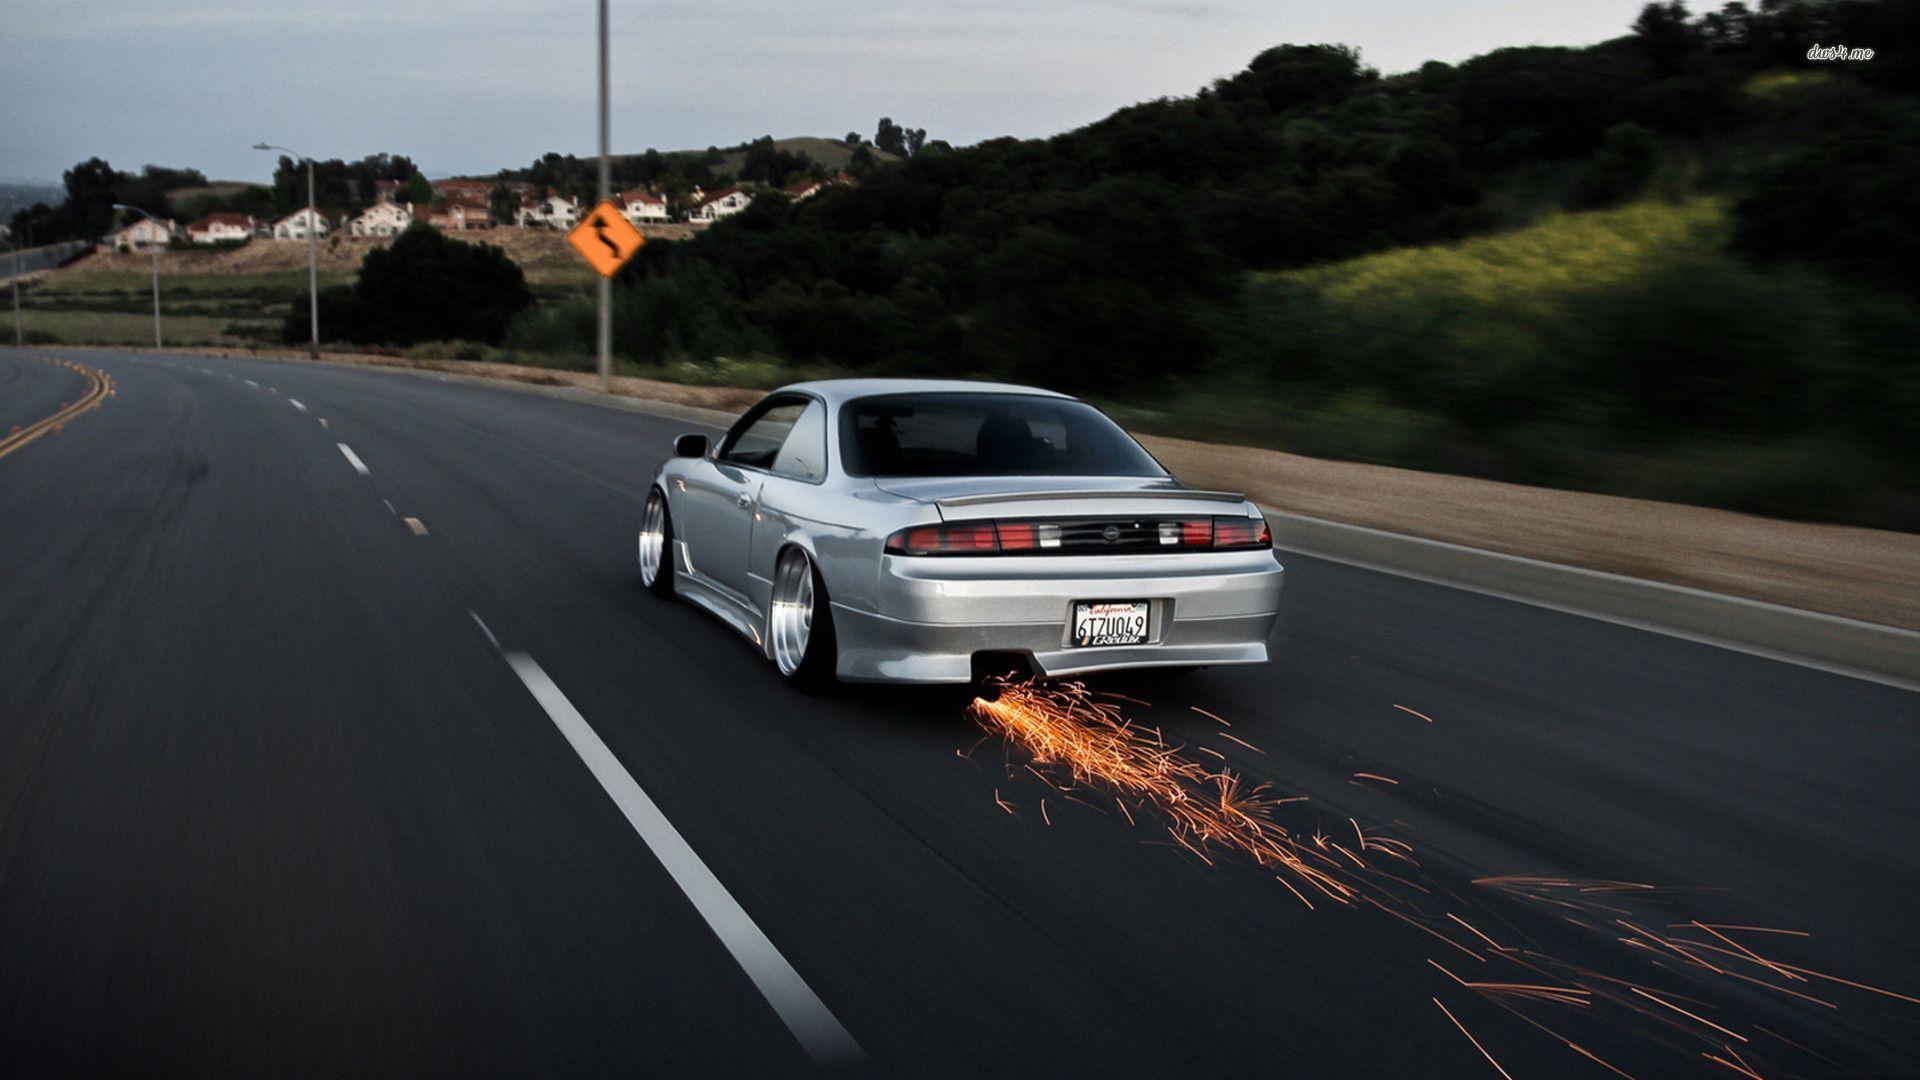 Picture Nissan 240sx Tuned Car Wallpaper In High